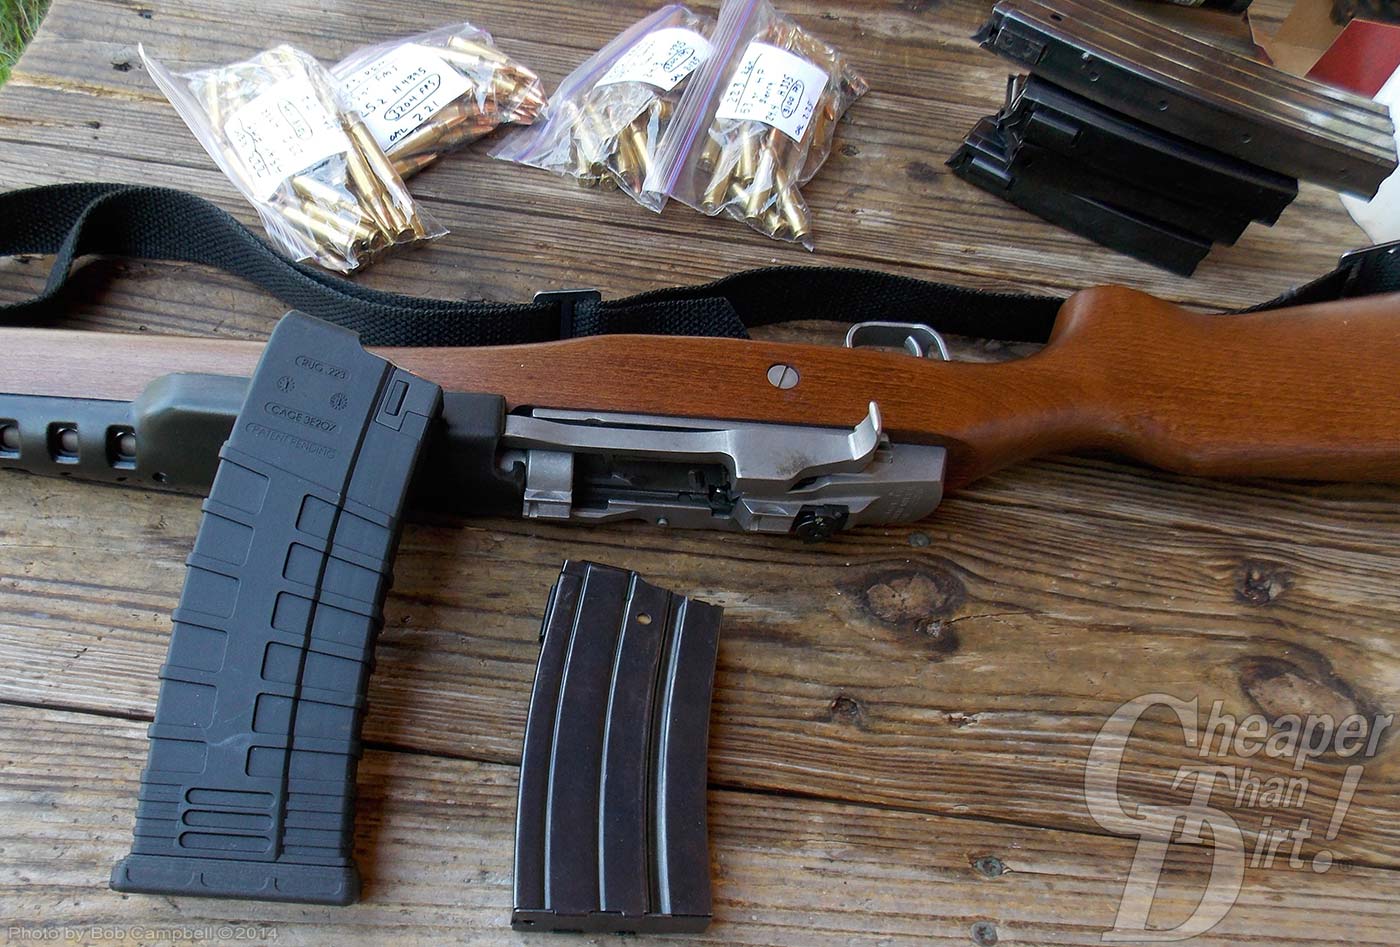 Brown Ruger Mini 14 lying on a wooden background